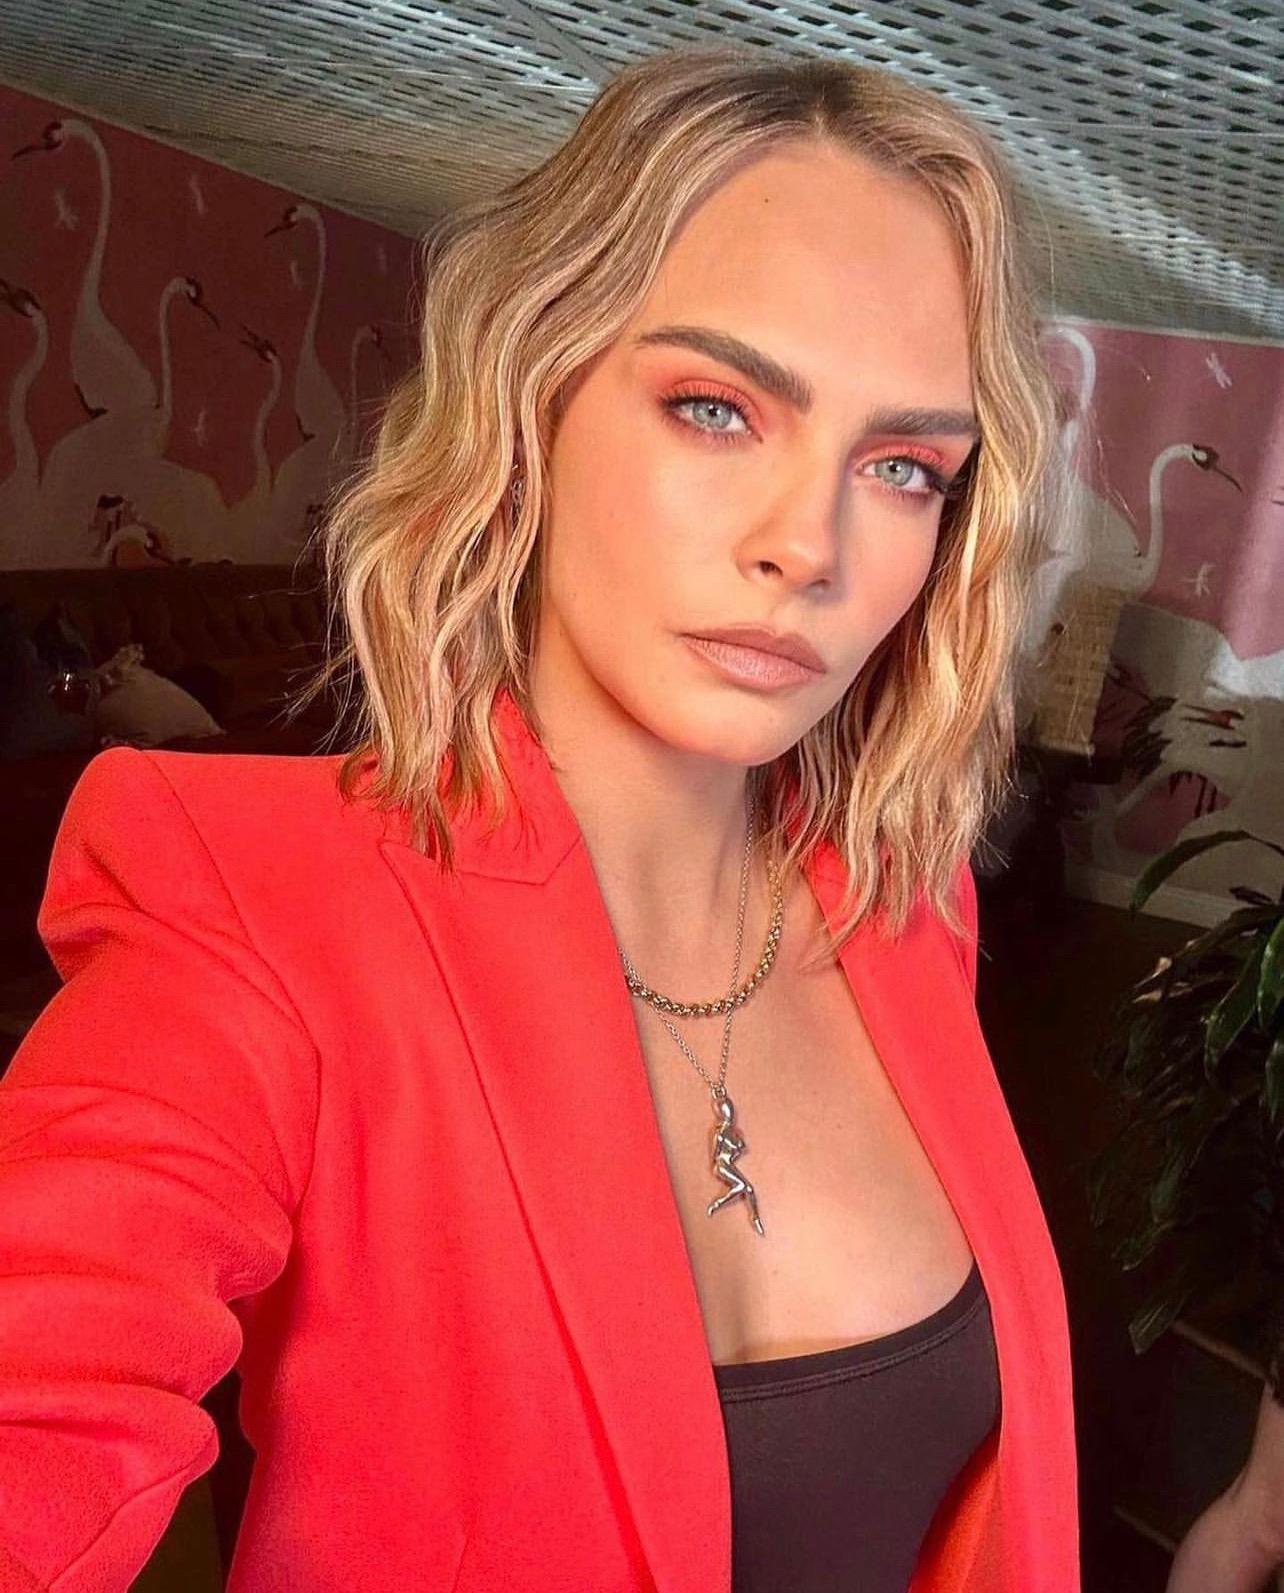 Cara Delevingne 'Starts Over' With New Hair As Sobriety Journey Progresses